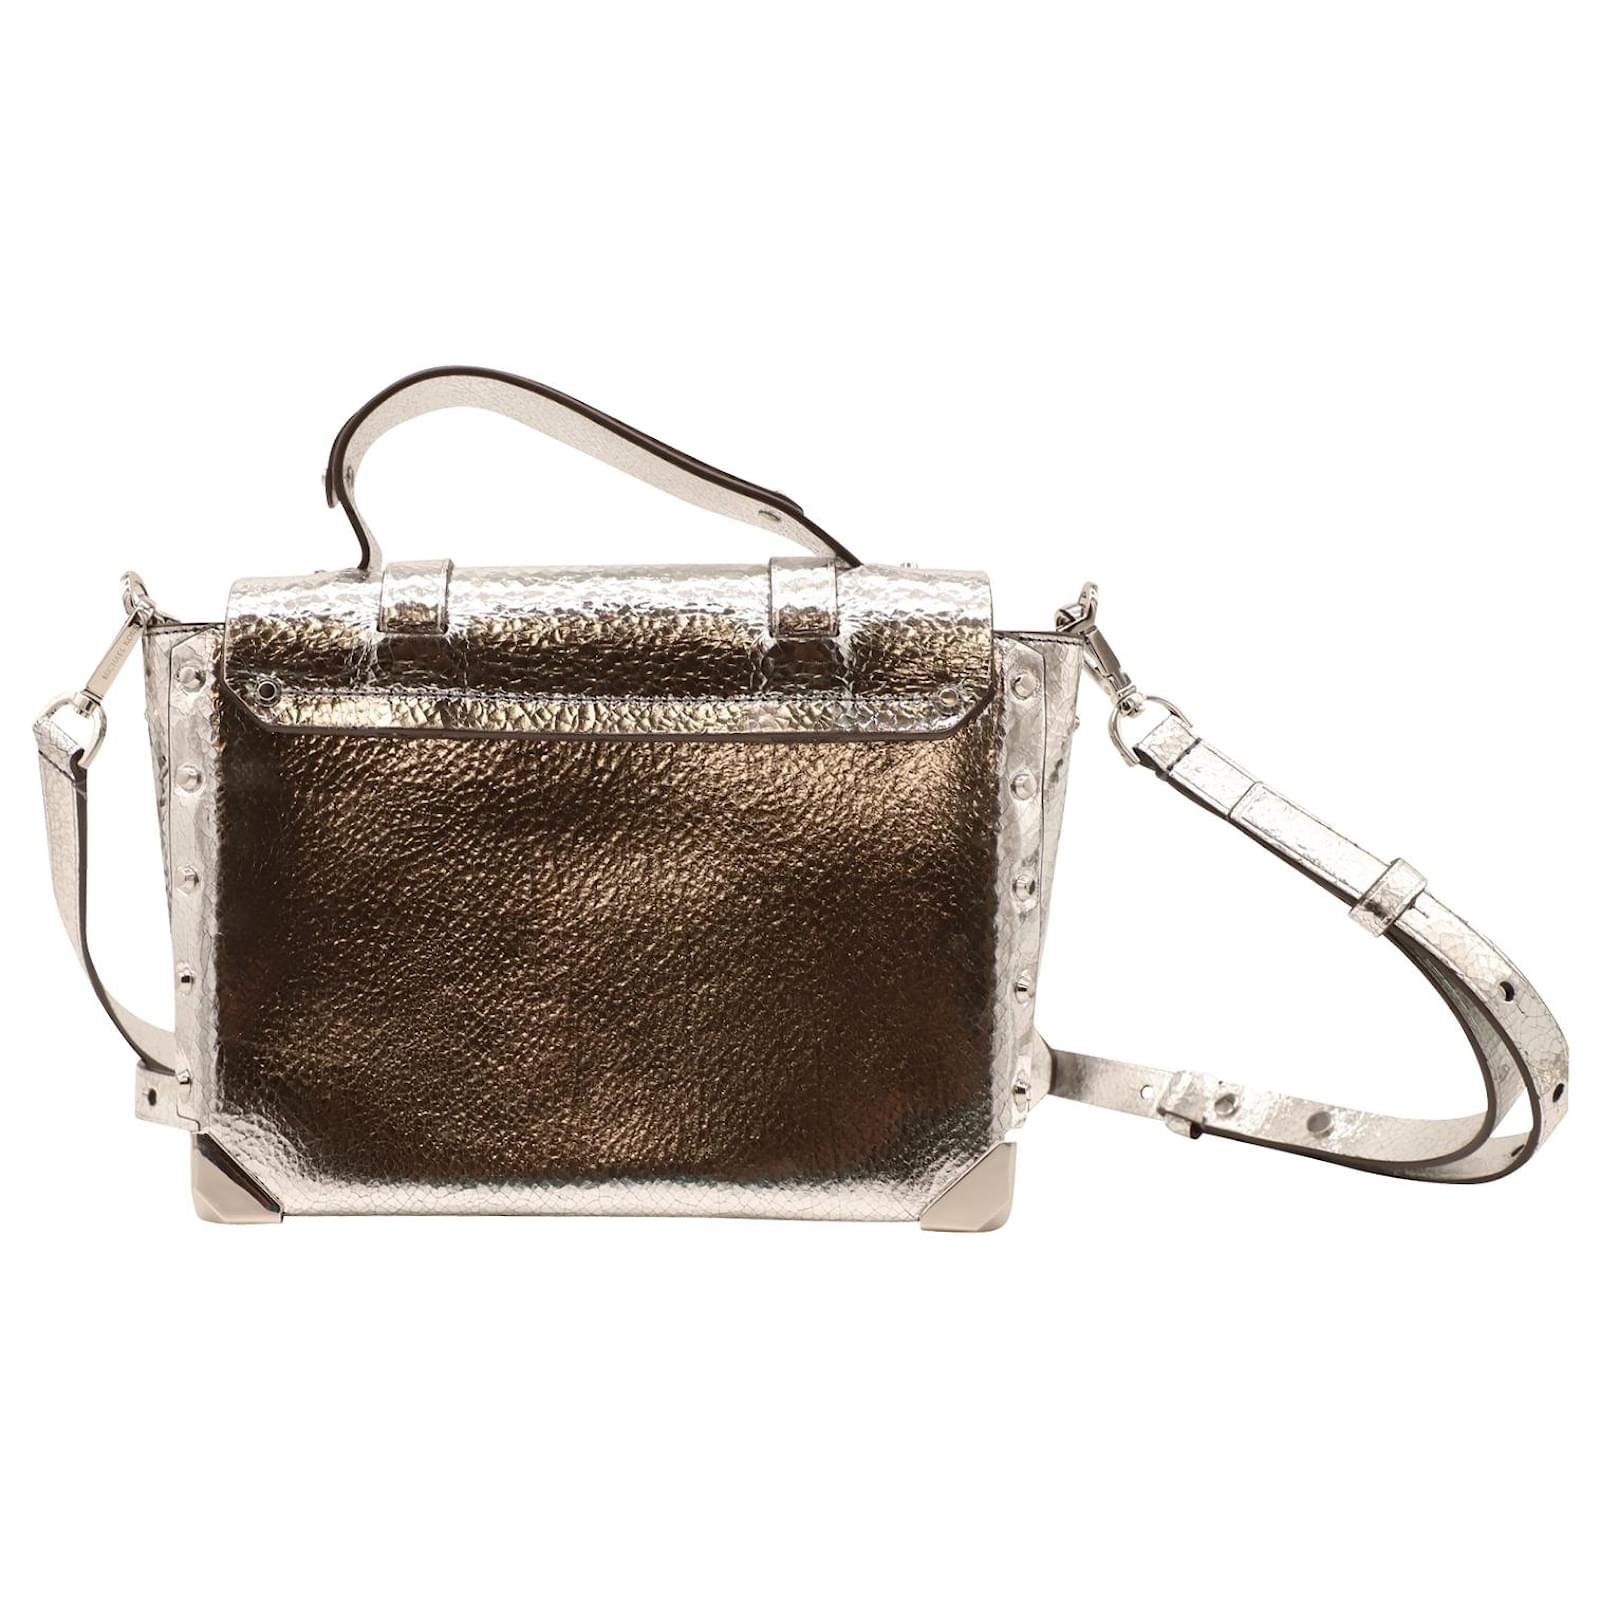 NEW Michael Kors Manhattan Small or MD Silver Crackled Leather Not an  outlet bag